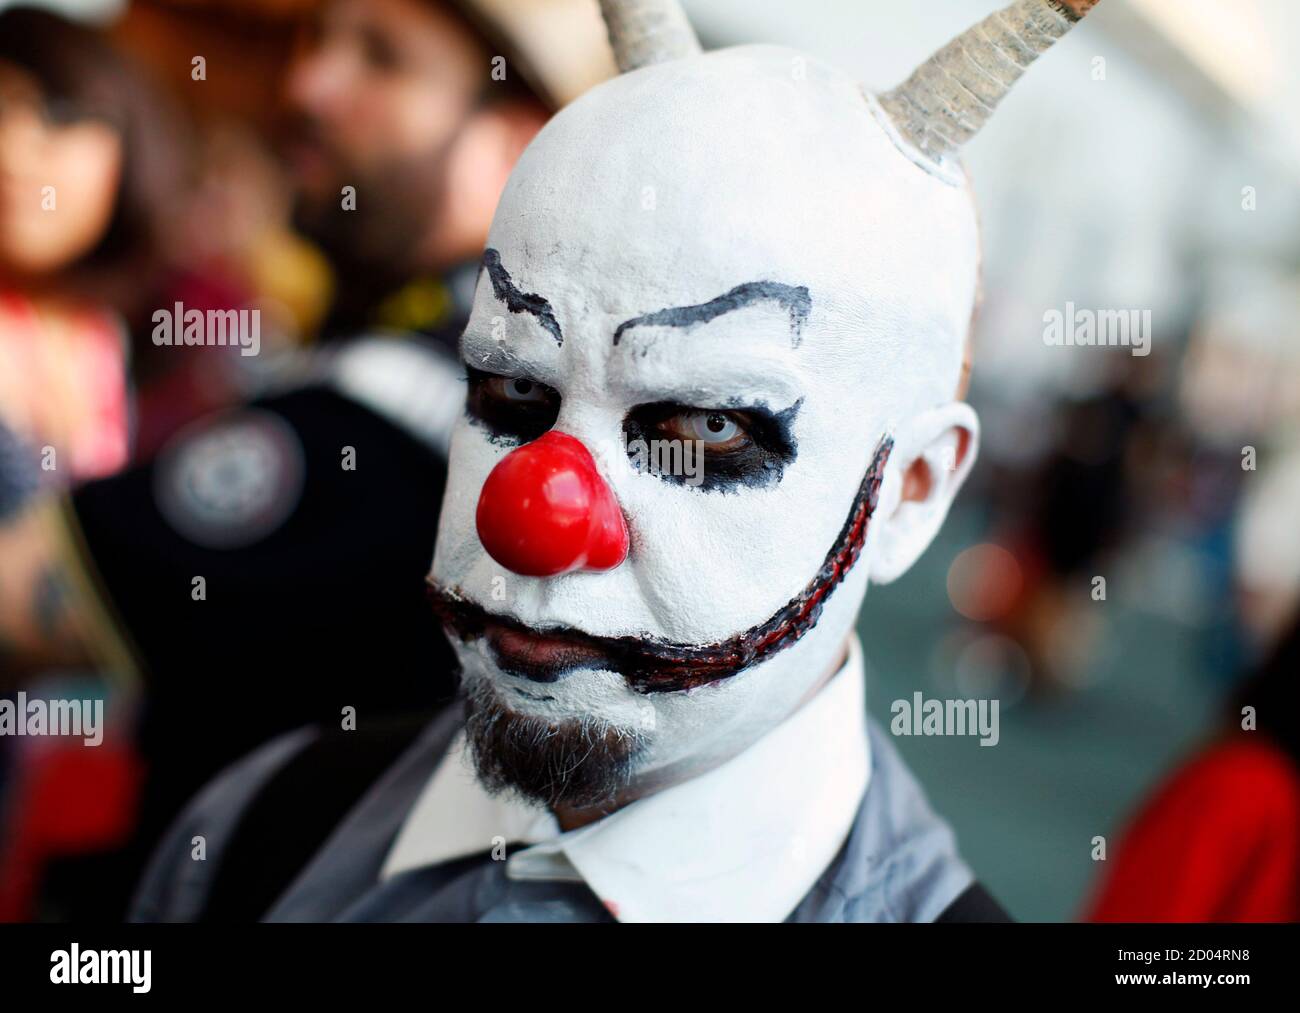 An attendee dressed in costume walks the Comic Con convention floor during the pop culture event in San Diego, California July 22, 2011.   REUTERS/Mike Blake  (UNITED STATES - Tags: ENTERTAINMENT SOCIETY IMAGES OF THE DAY) Stock Photo